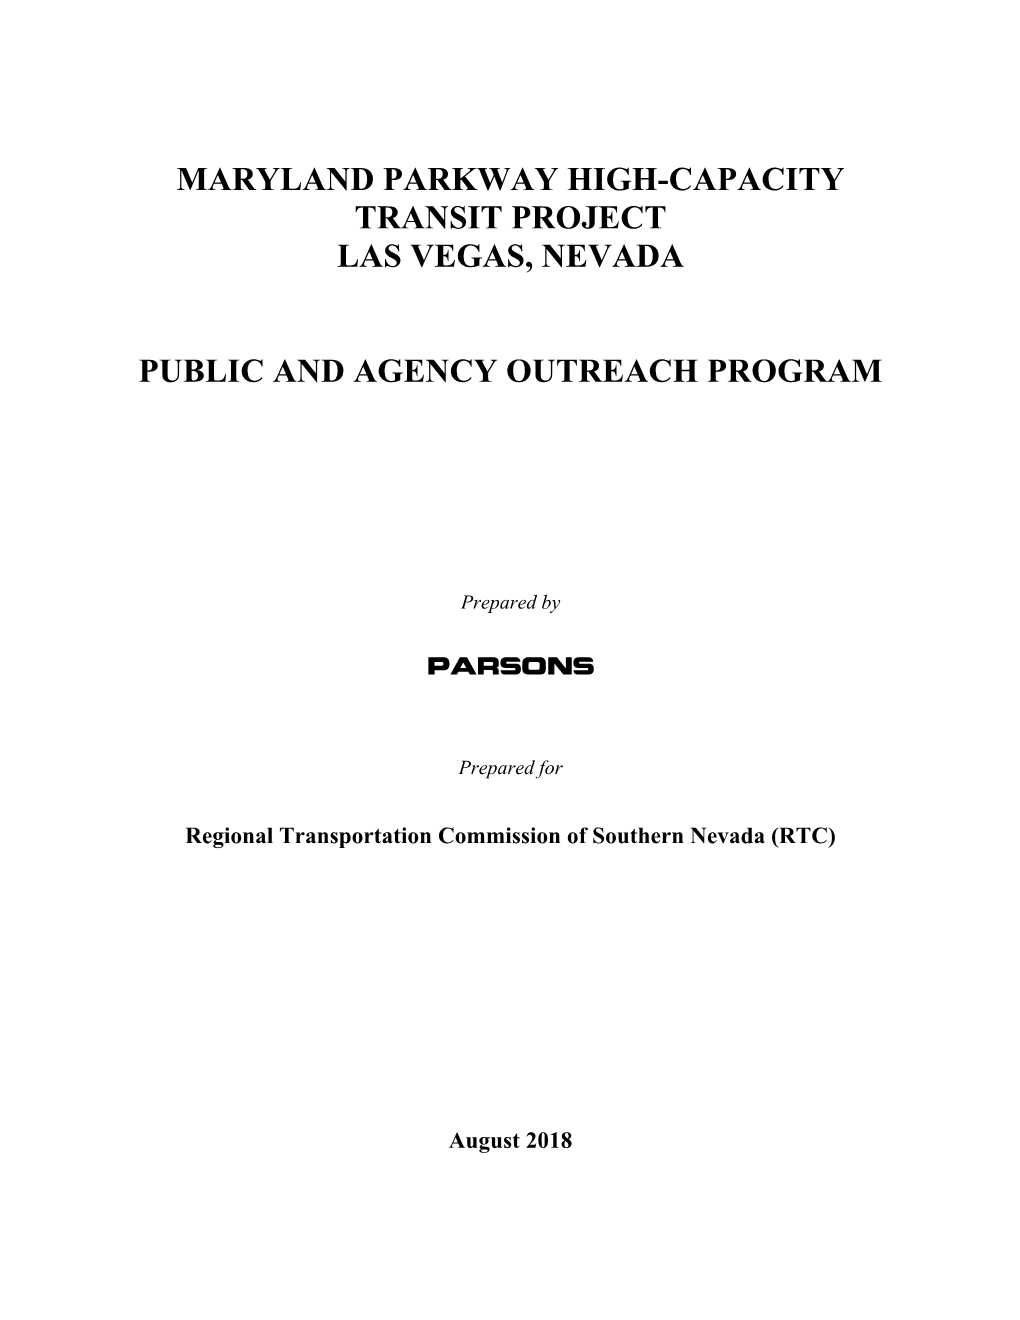 Maryland Parkway Public Outreach Program